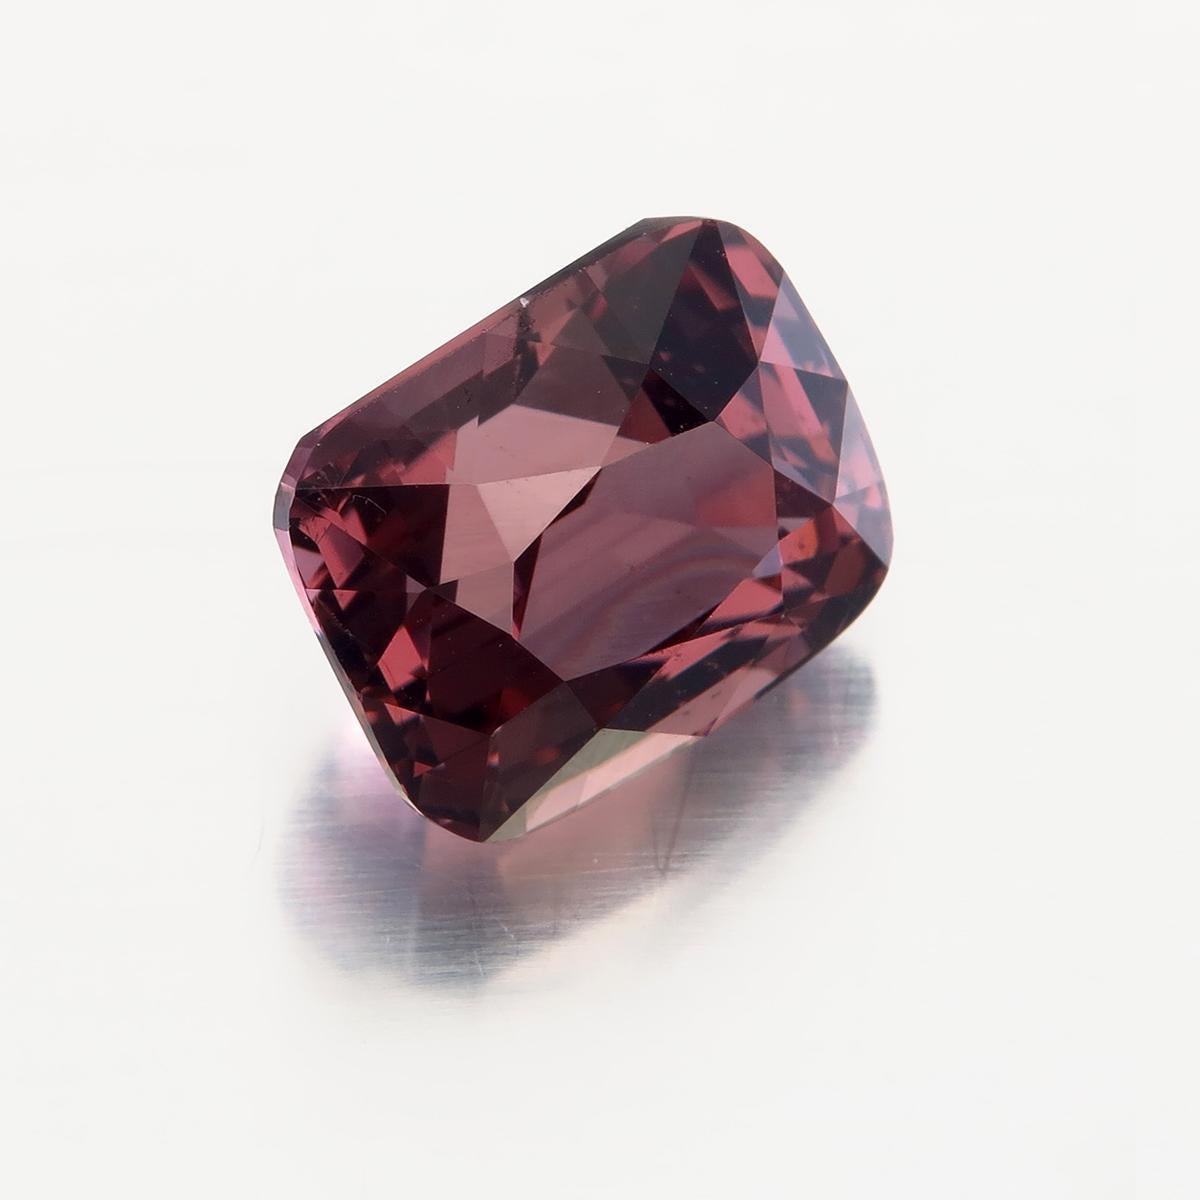 Antique Cushion Cut Lotus Certified 3.78 Carat Pink Spinel from Sri Lanka For Sale